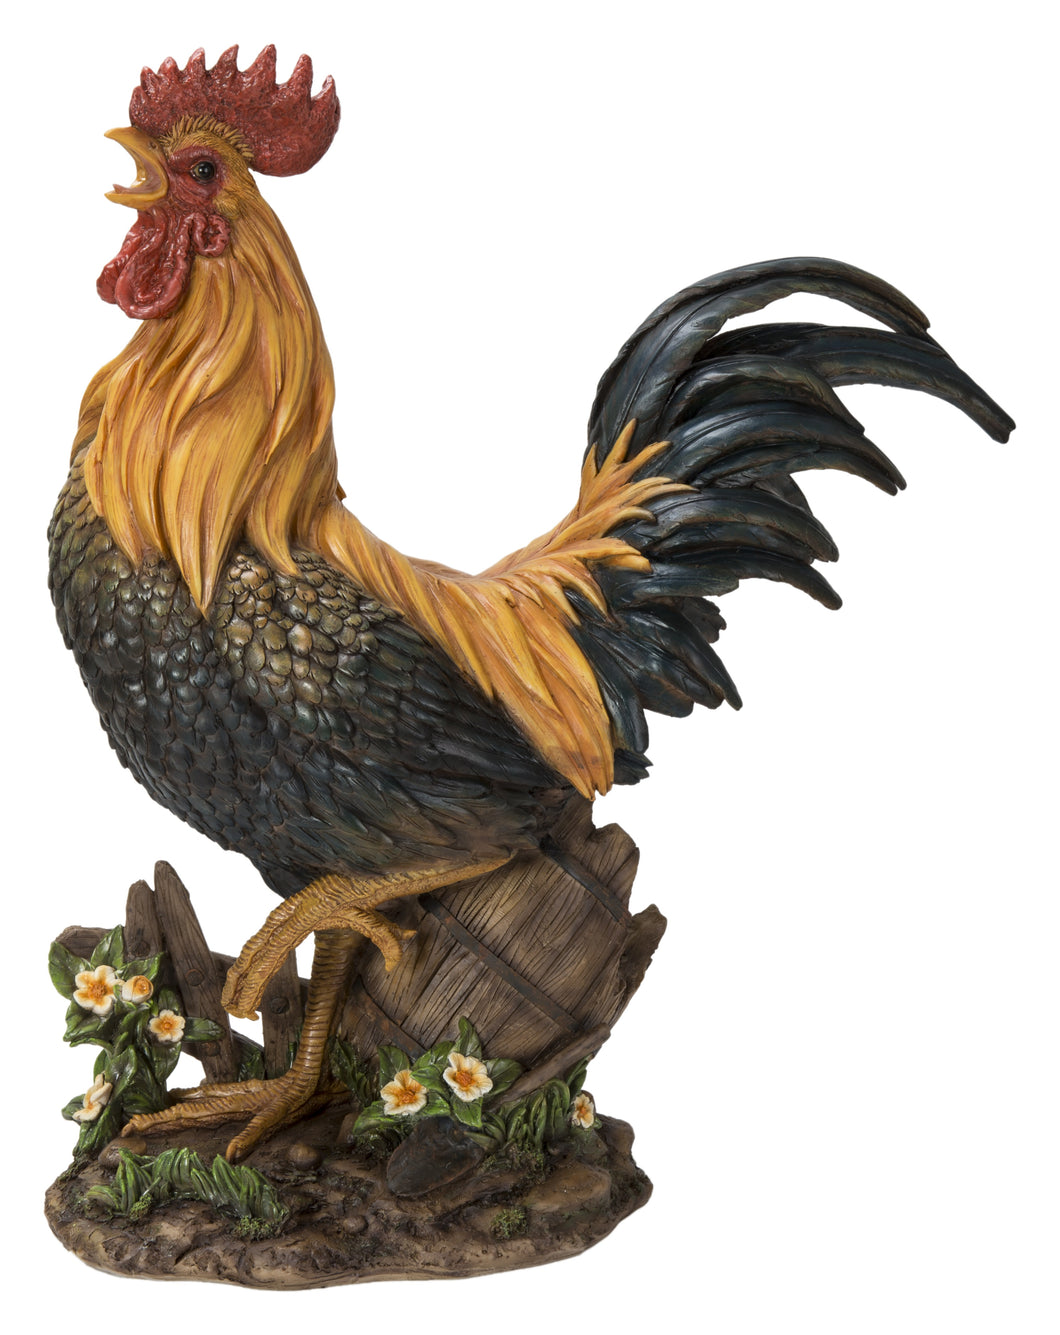 LARGE ROOSTER ON A WOOD BARREL